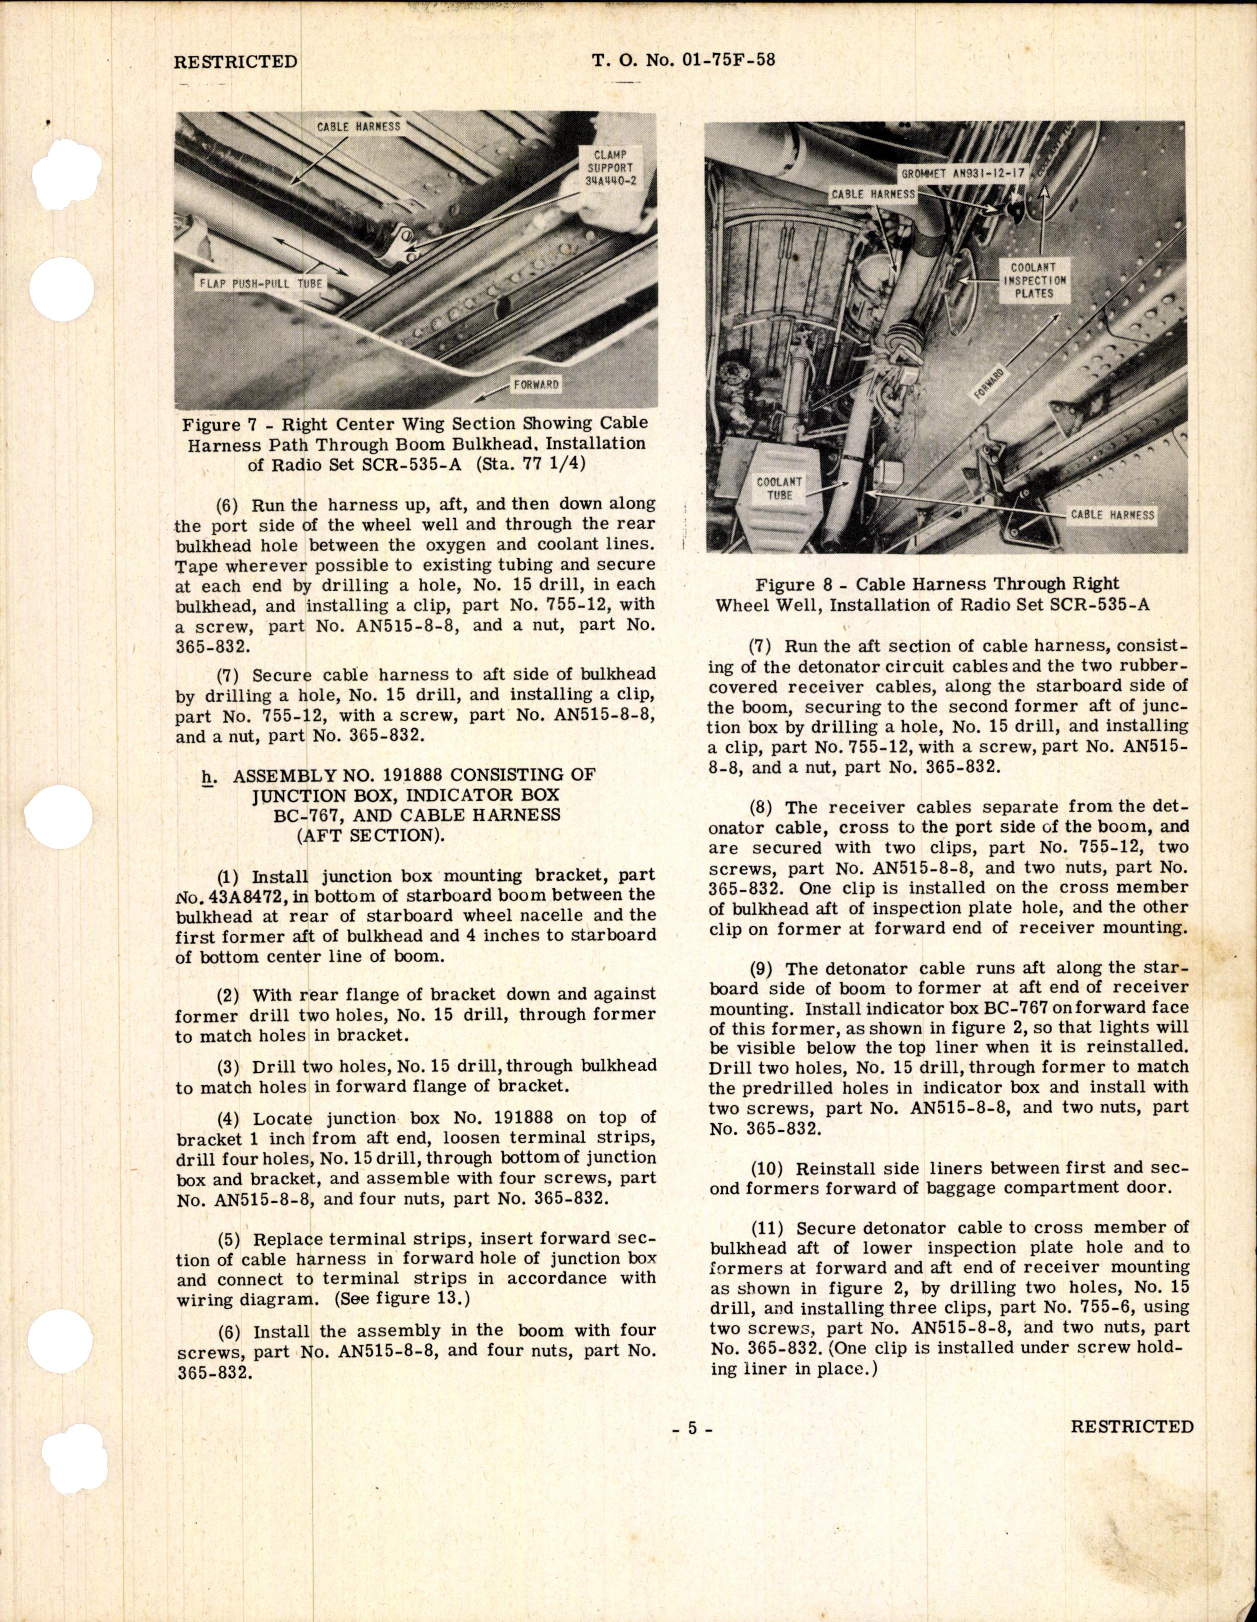 Sample page 5 from AirCorps Library document: Installation of Group A Parts of SCR-535-A for P-38D, E, and F